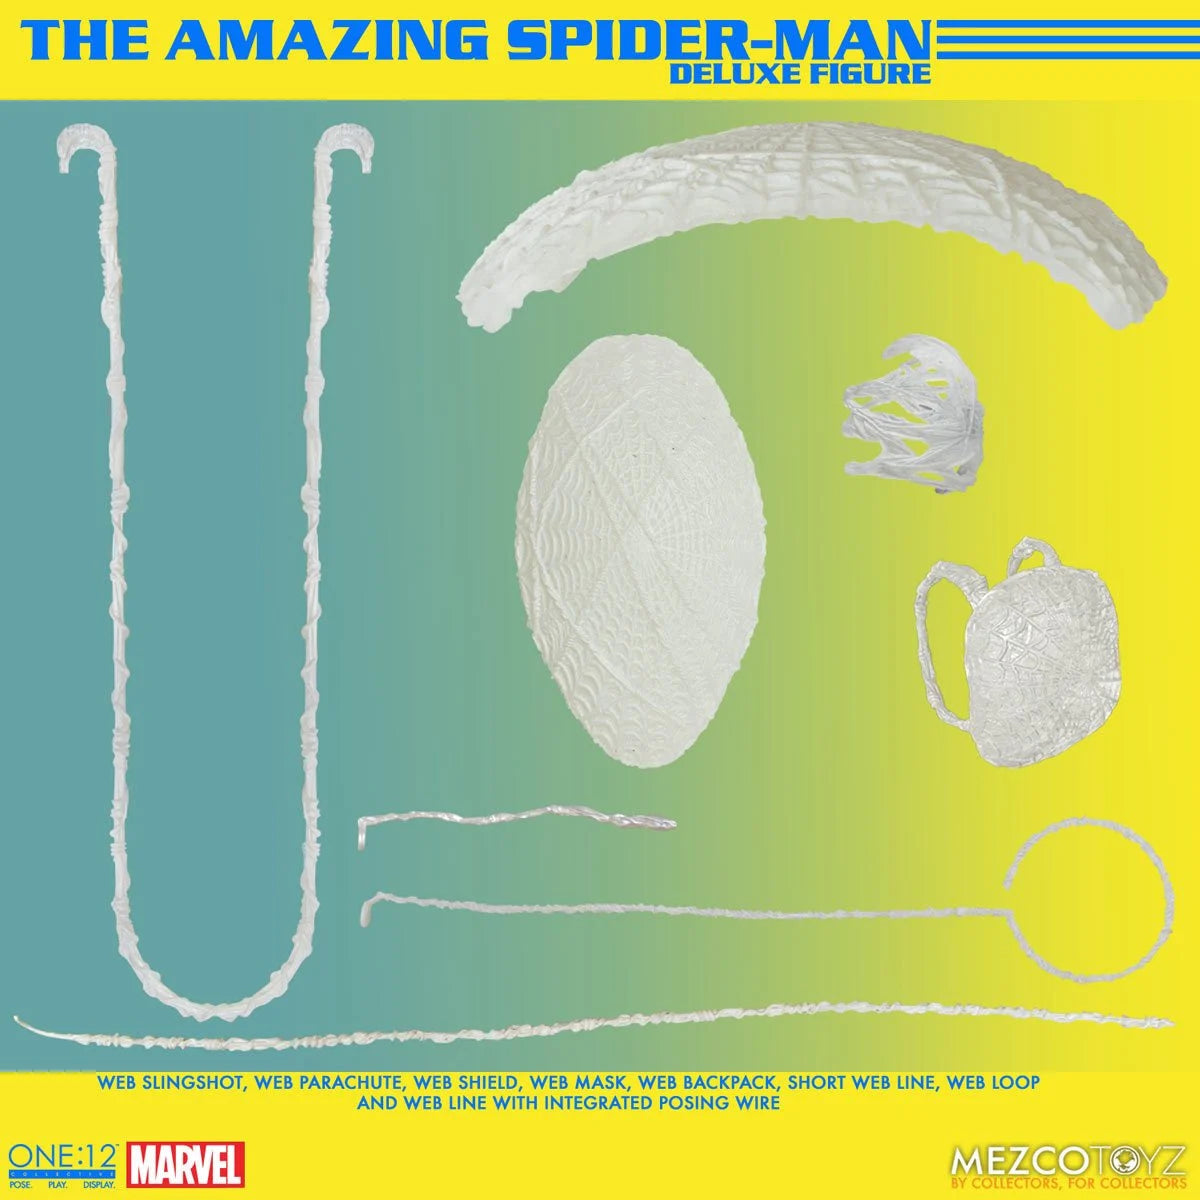 The Amazing Spider-Man One:12 Collective Deluxe Edition Hasbro